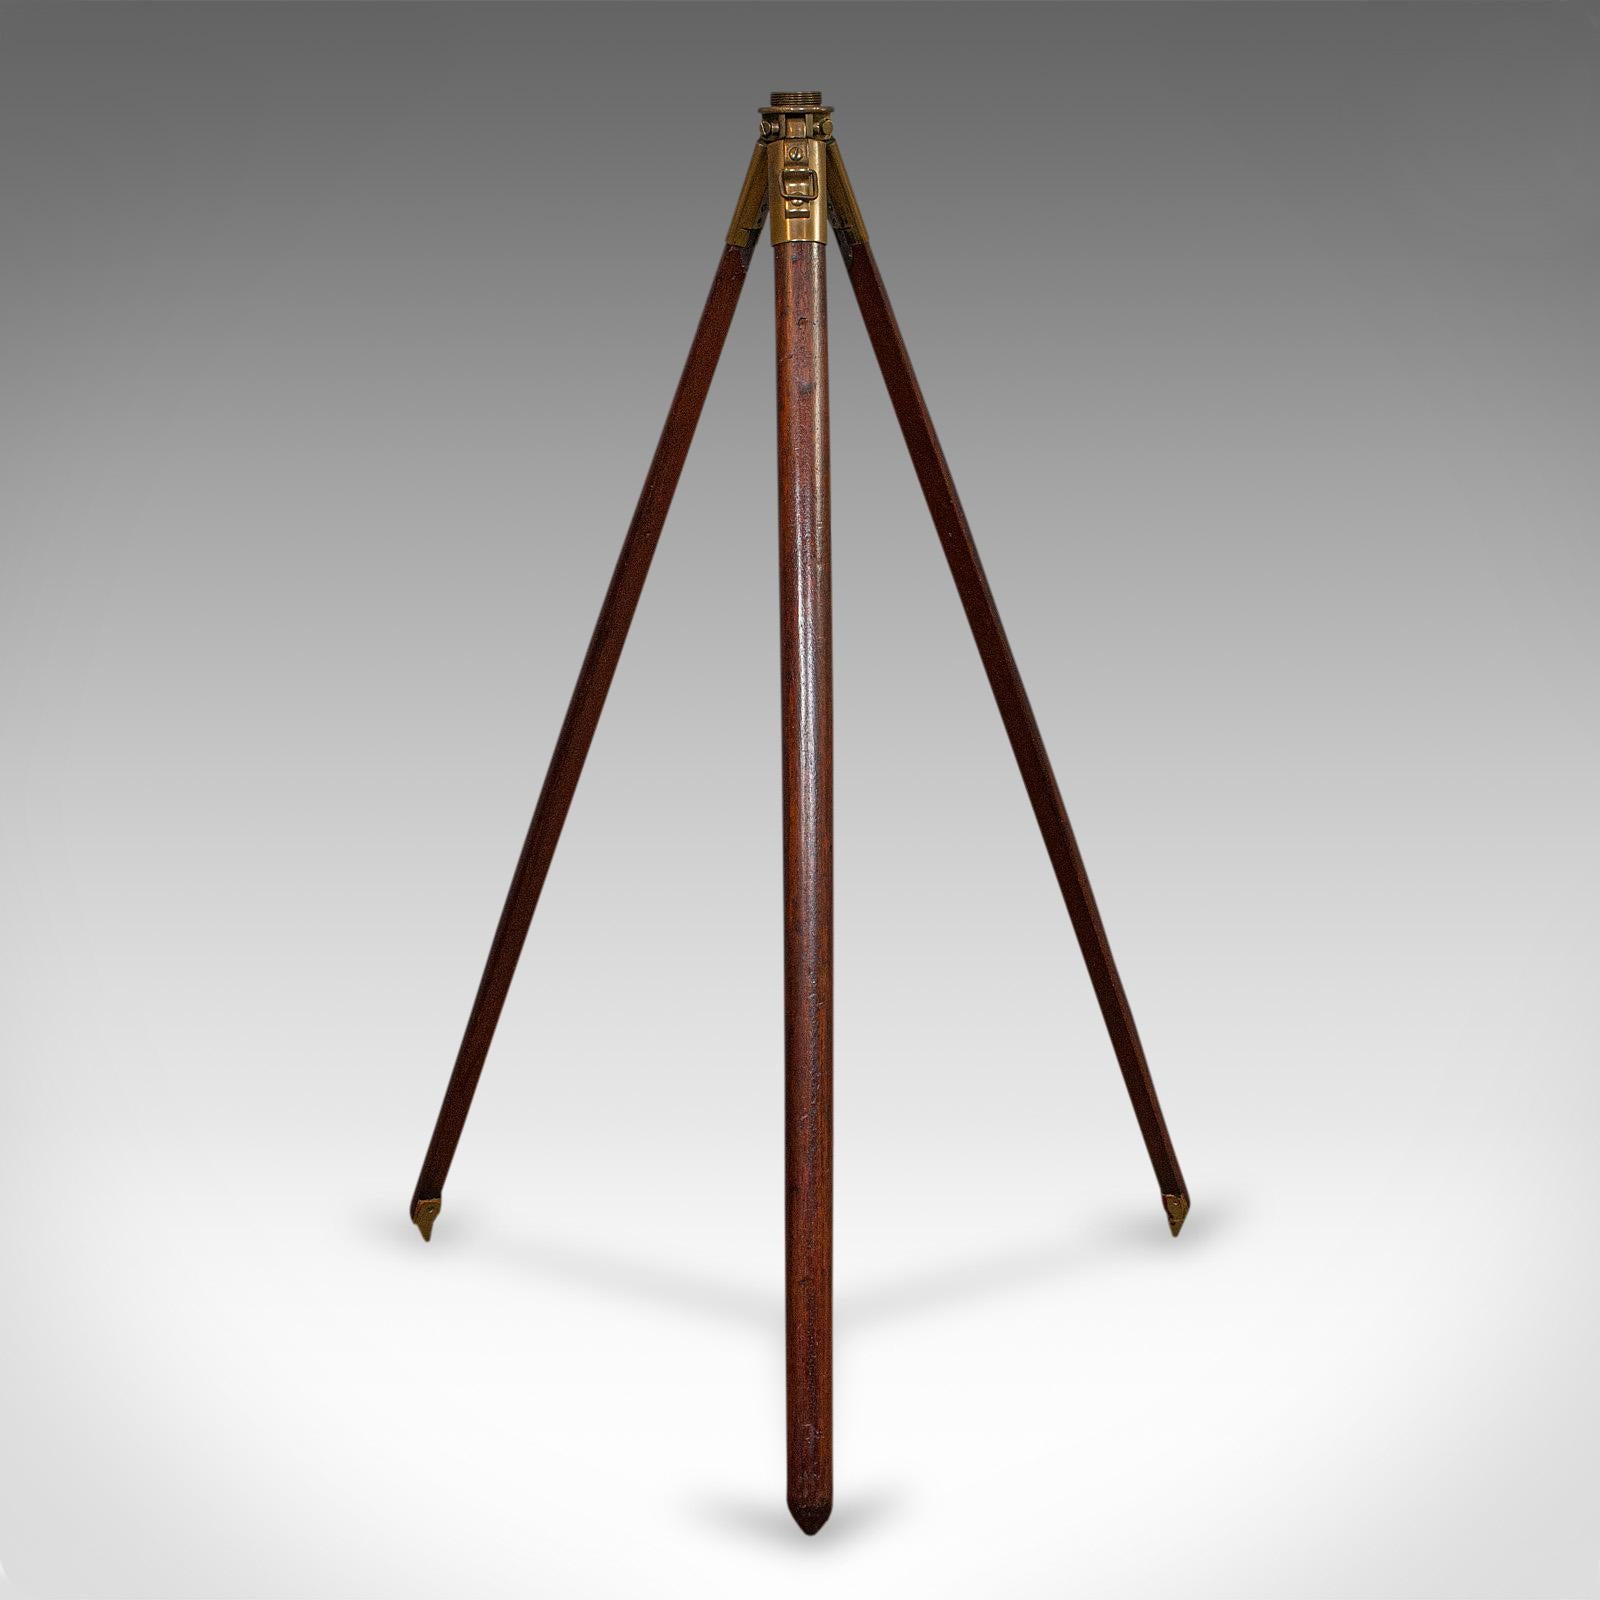 This is a vintage tripod. An English, mahogany and bronze helio, telescope or lamp stand with maker's mark, dating to the mid-20th century, circa 1941.

Displays a desirable aged patina
Mahogany shows fine grain interest
Bronze hardware